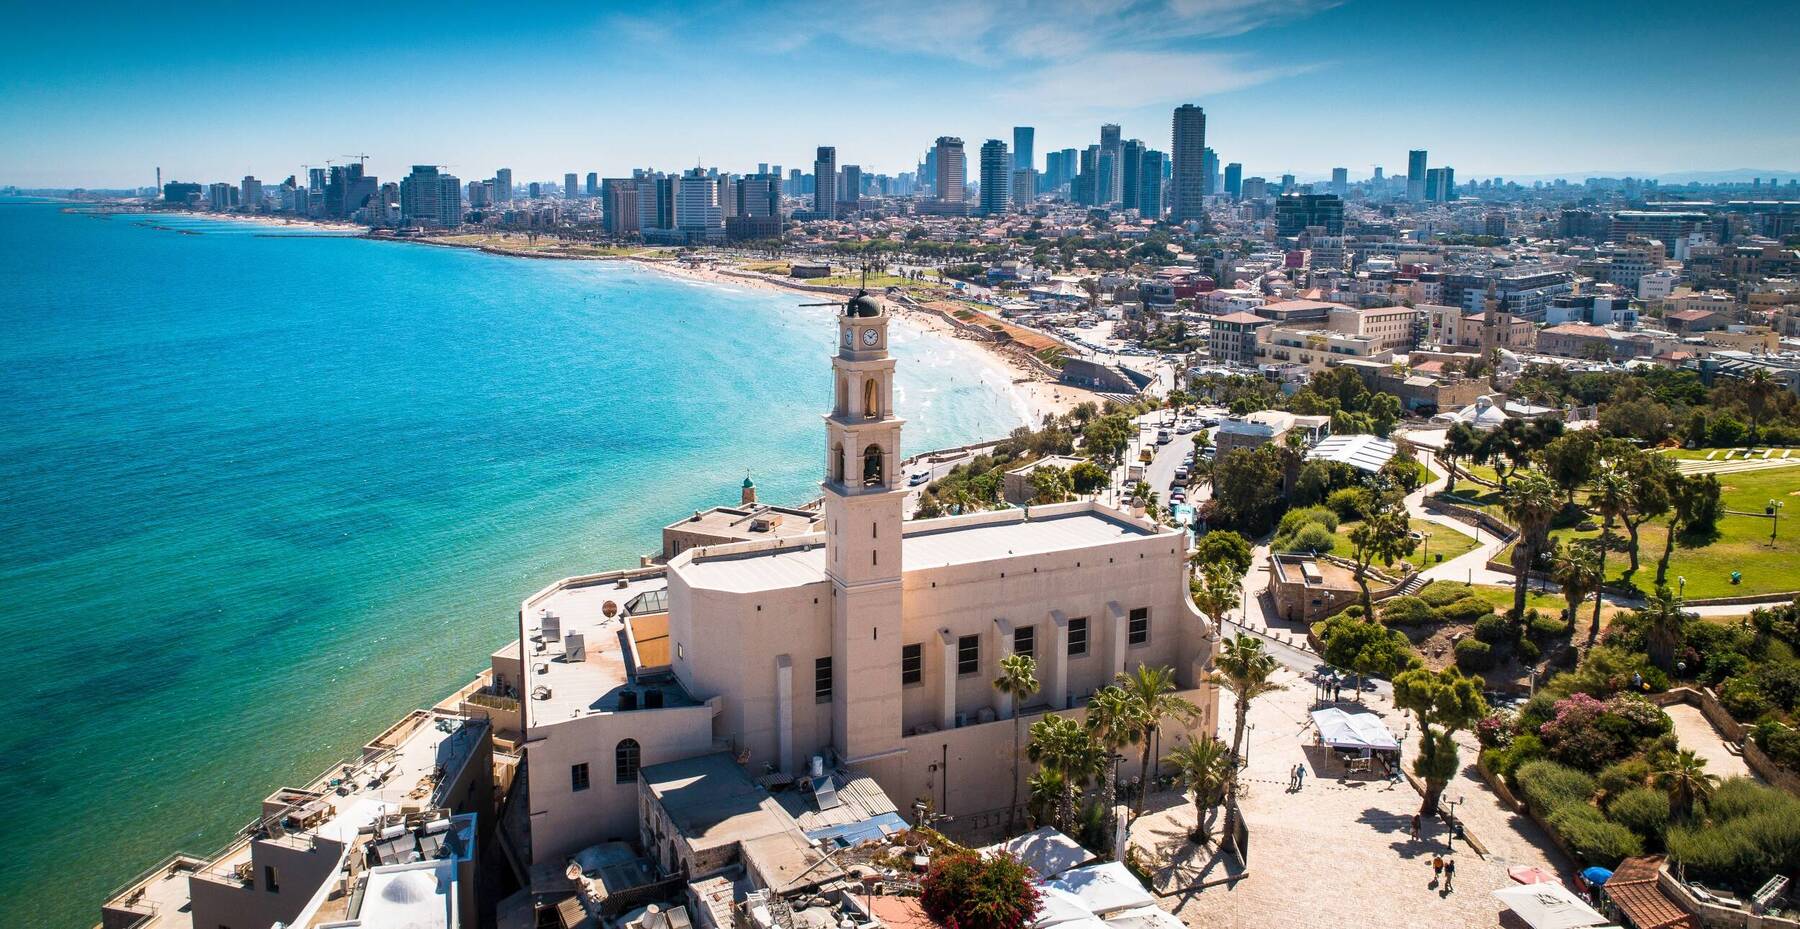 How to Maximize Your Trip to Tel Aviv